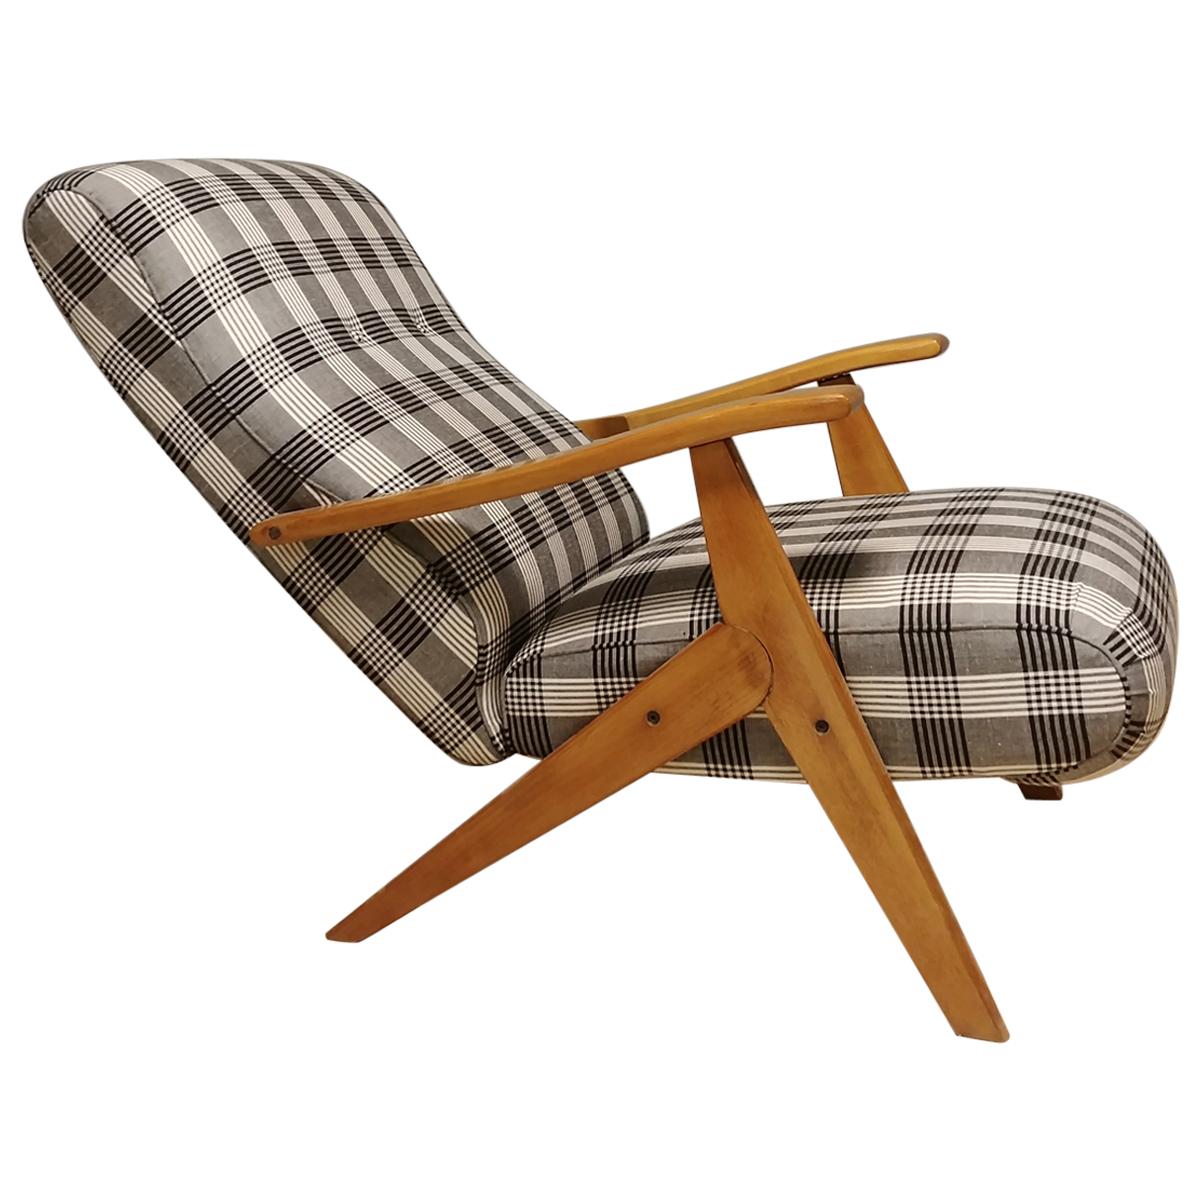 Midcentury Armchair in Fabric and Wood, Italian Design, 1960s